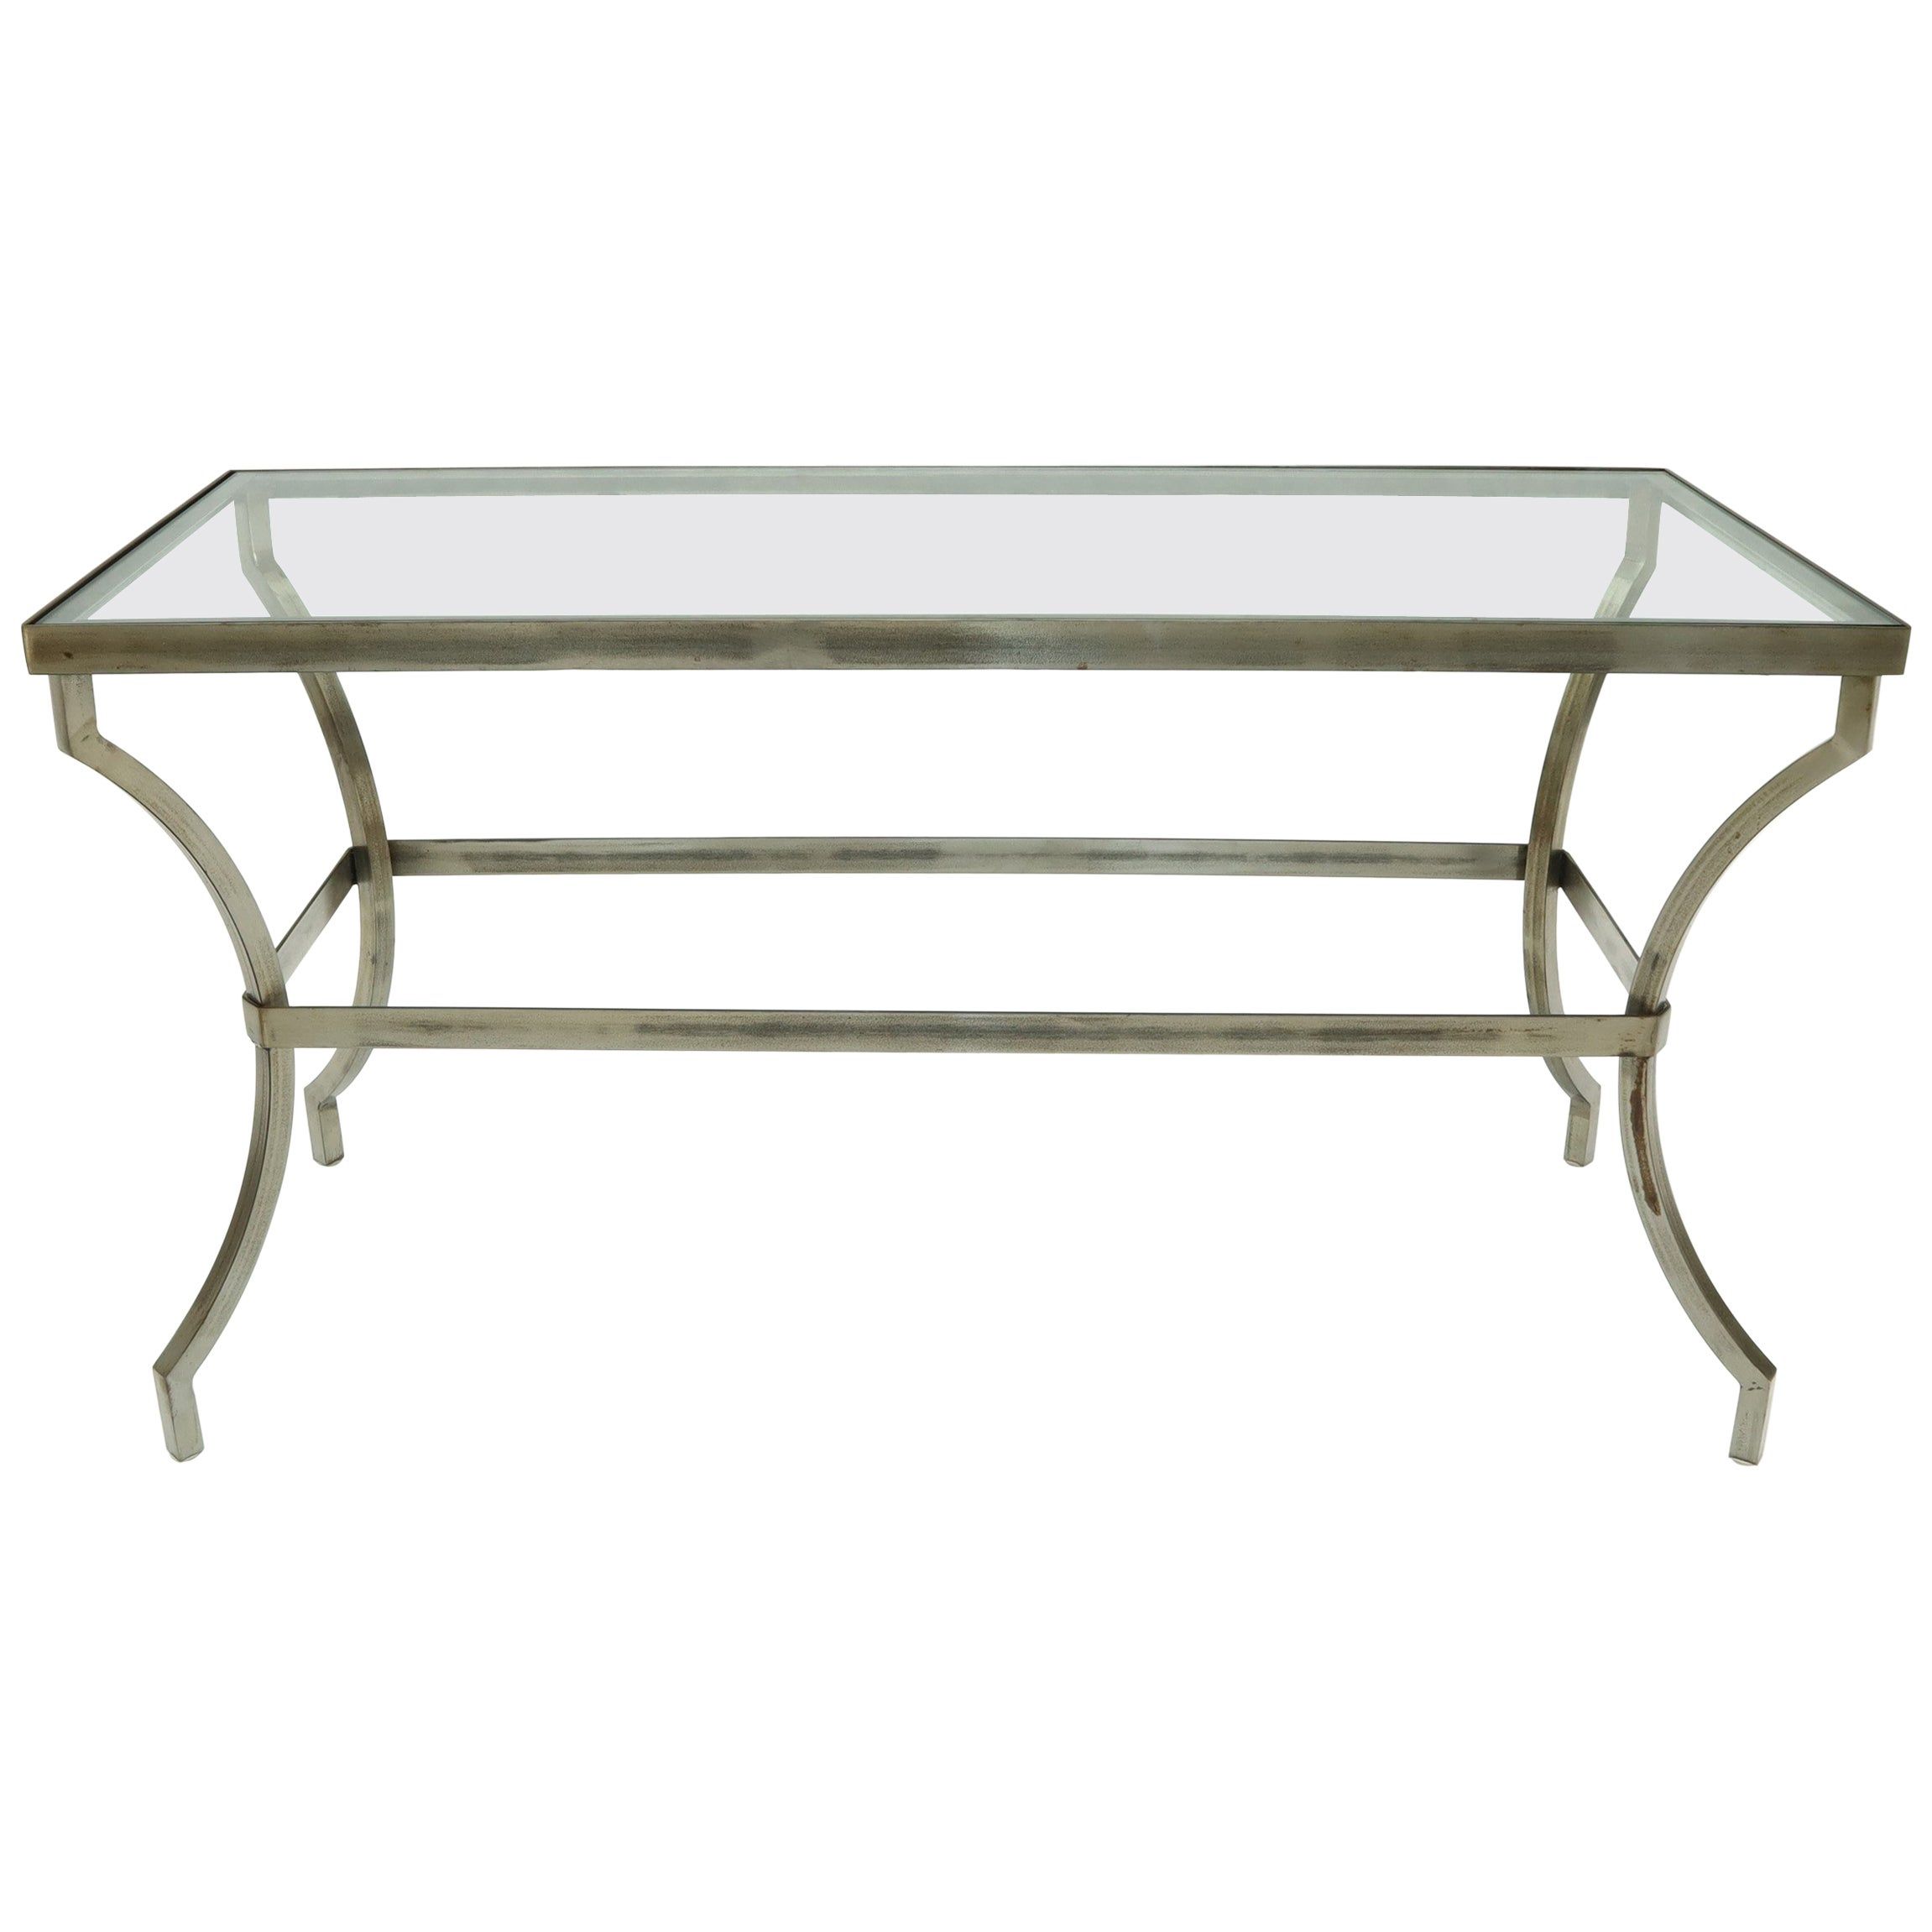 Vintage Heavy Industrial Steel Wood Console Table At 1stdibs Pertaining To Oval Corn Straw Rope Console Tables (Photo 12 of 20)